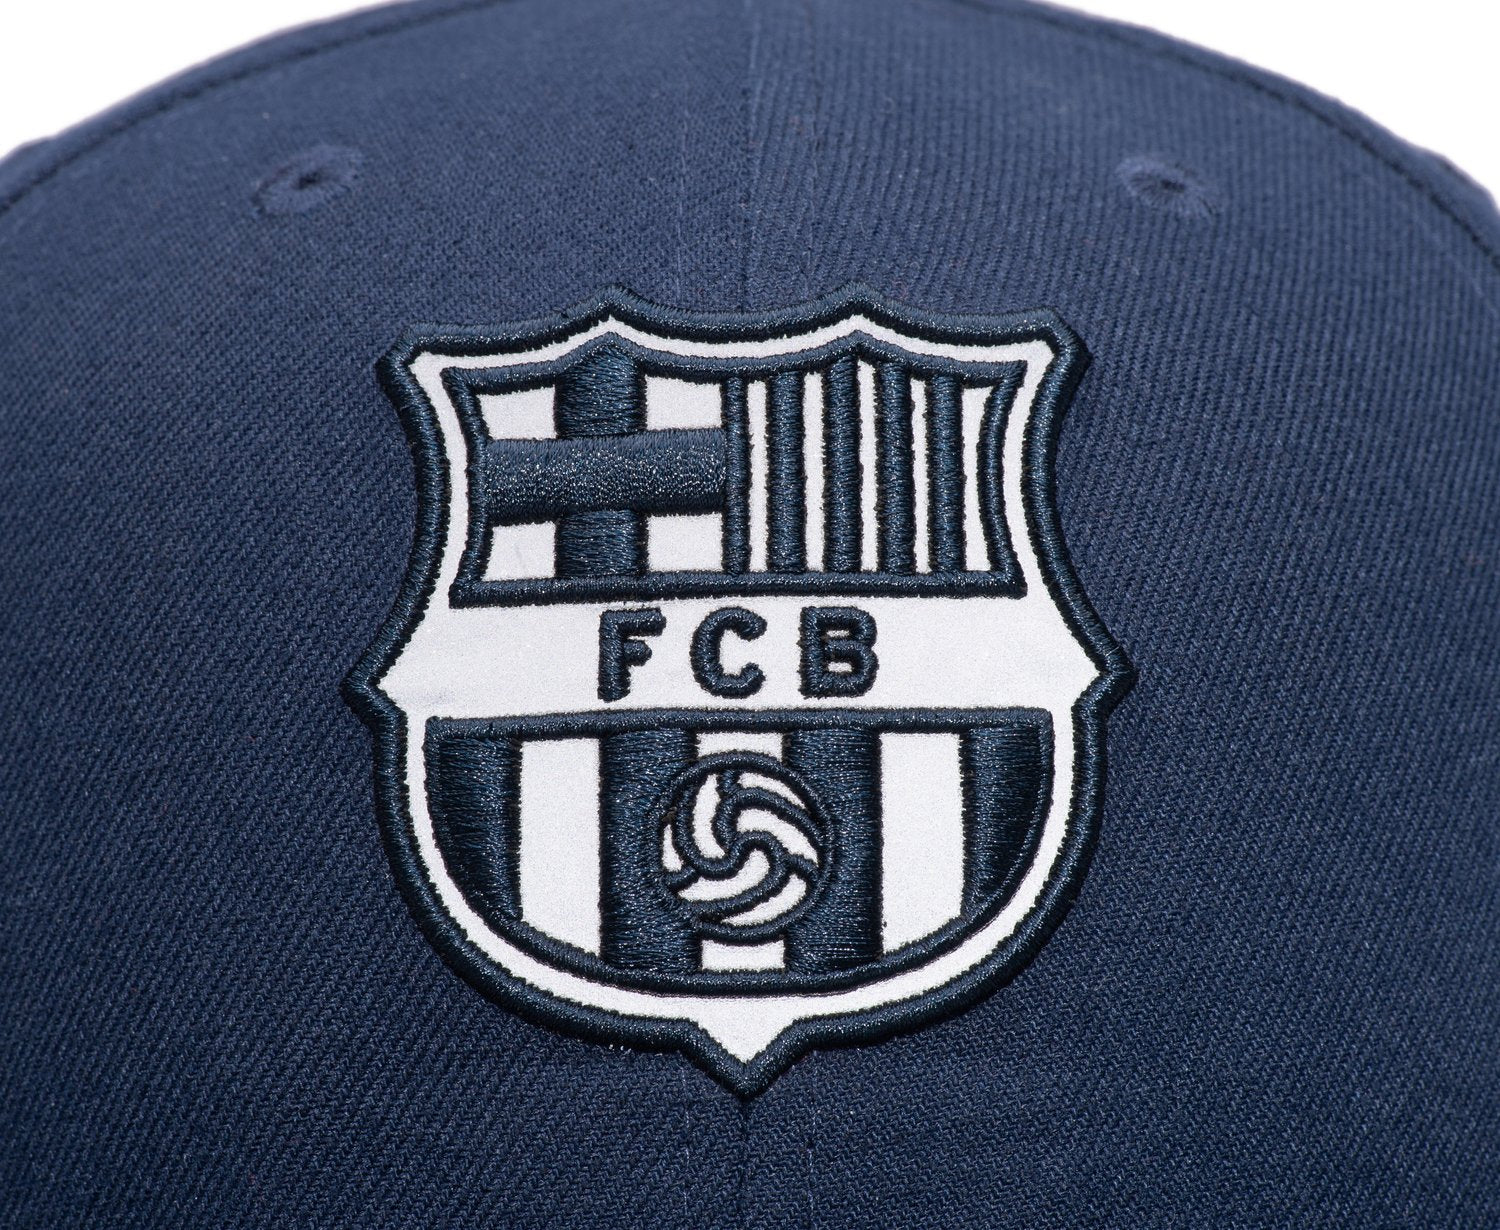 FI COLLECTIONS BARCELONA BRAVEHEART SNAPBACK HAT-NAVY/WHITE